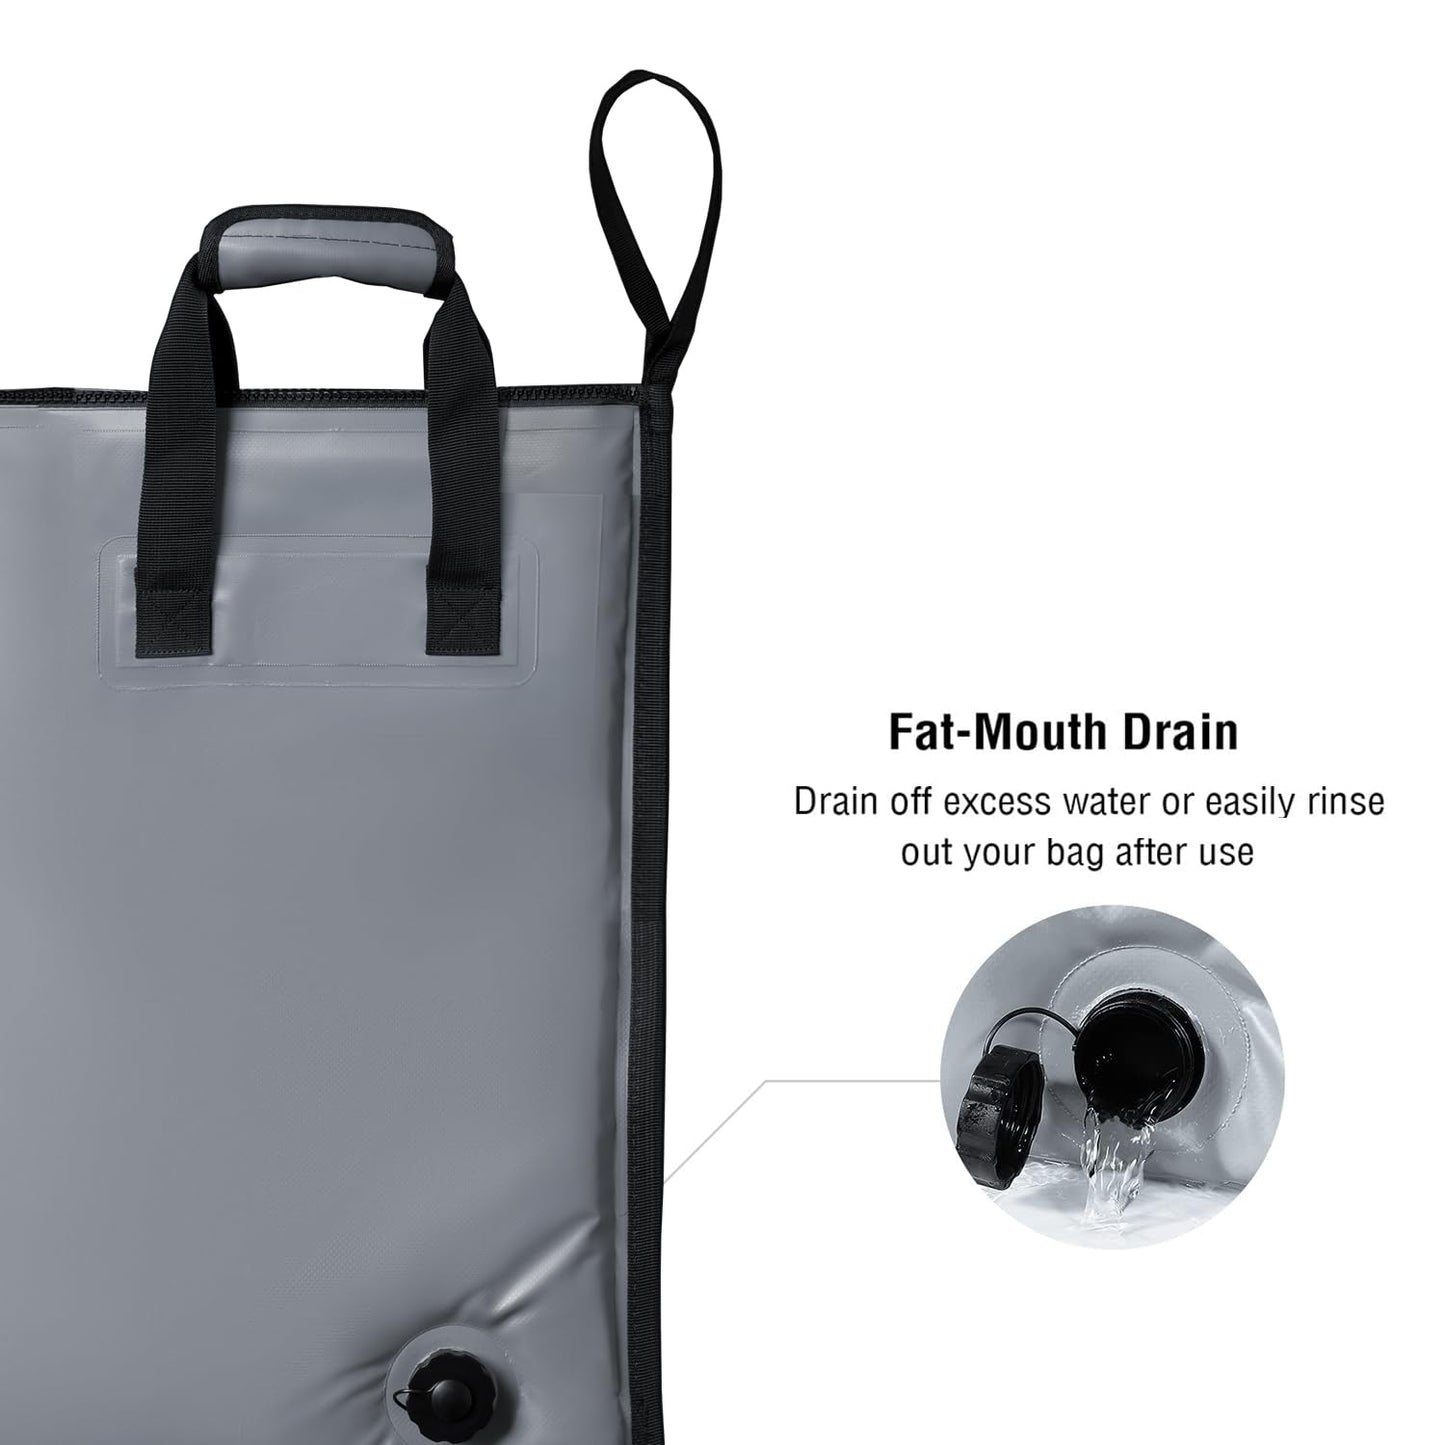 60x24'' Collapsible Insulated Fish Cooler Bag with Waterproof Zipper - Buffalo Gear 